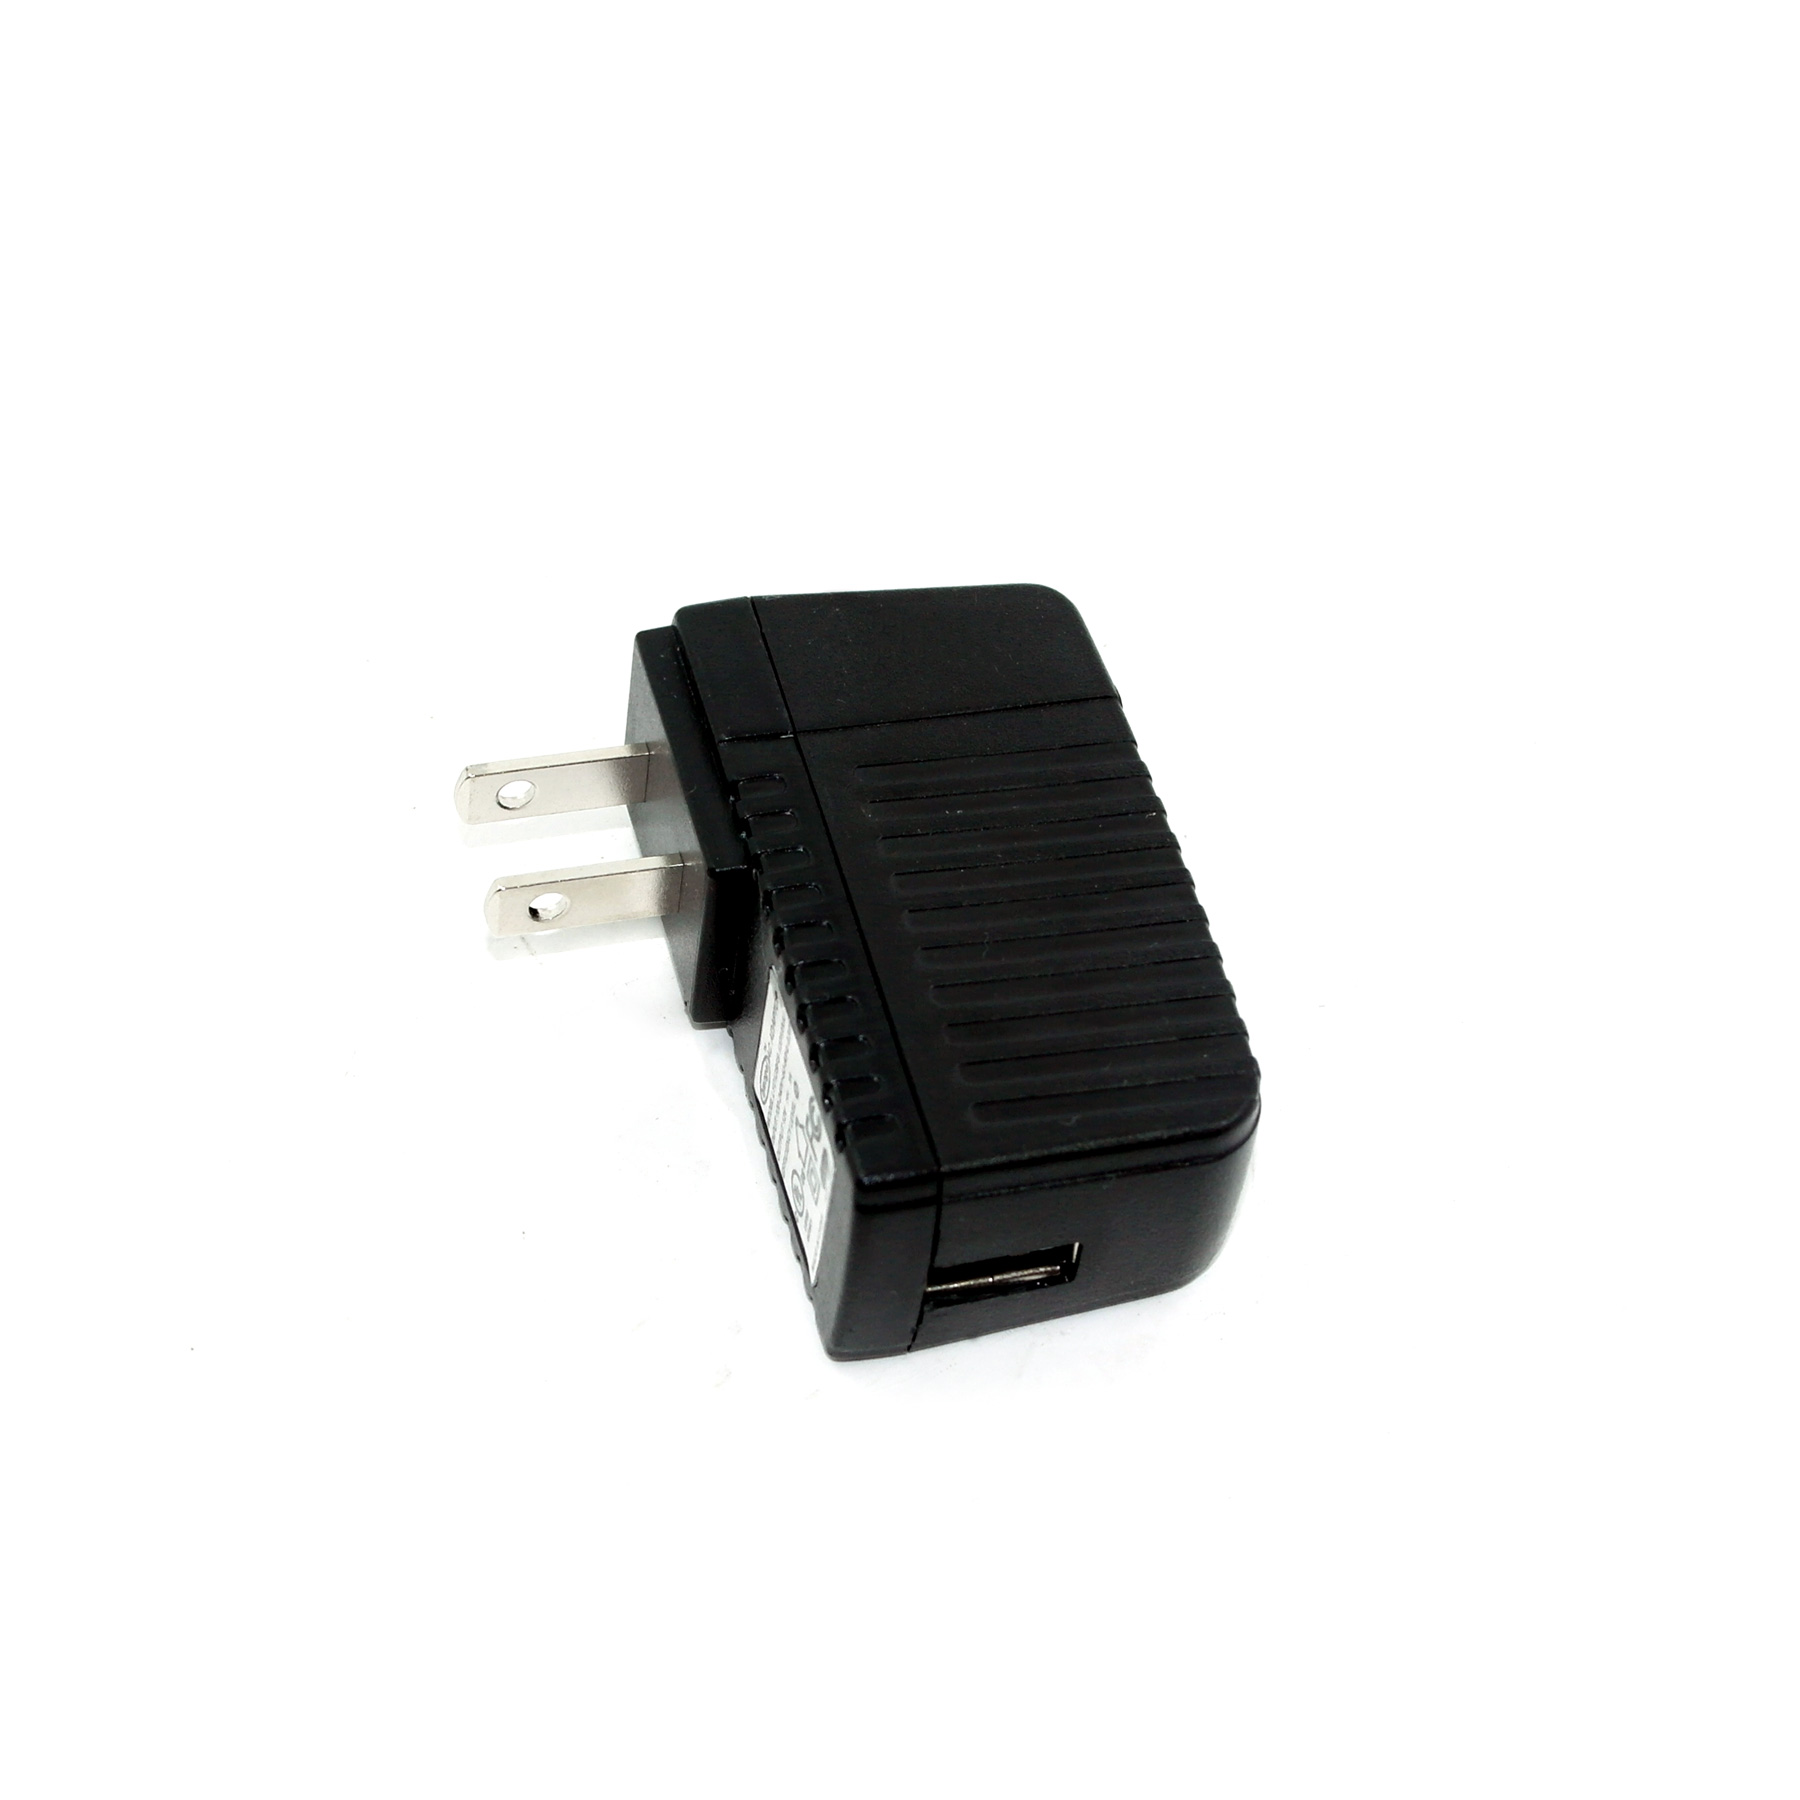 5V 2A USB adaptor, 5V 2A switching adapter